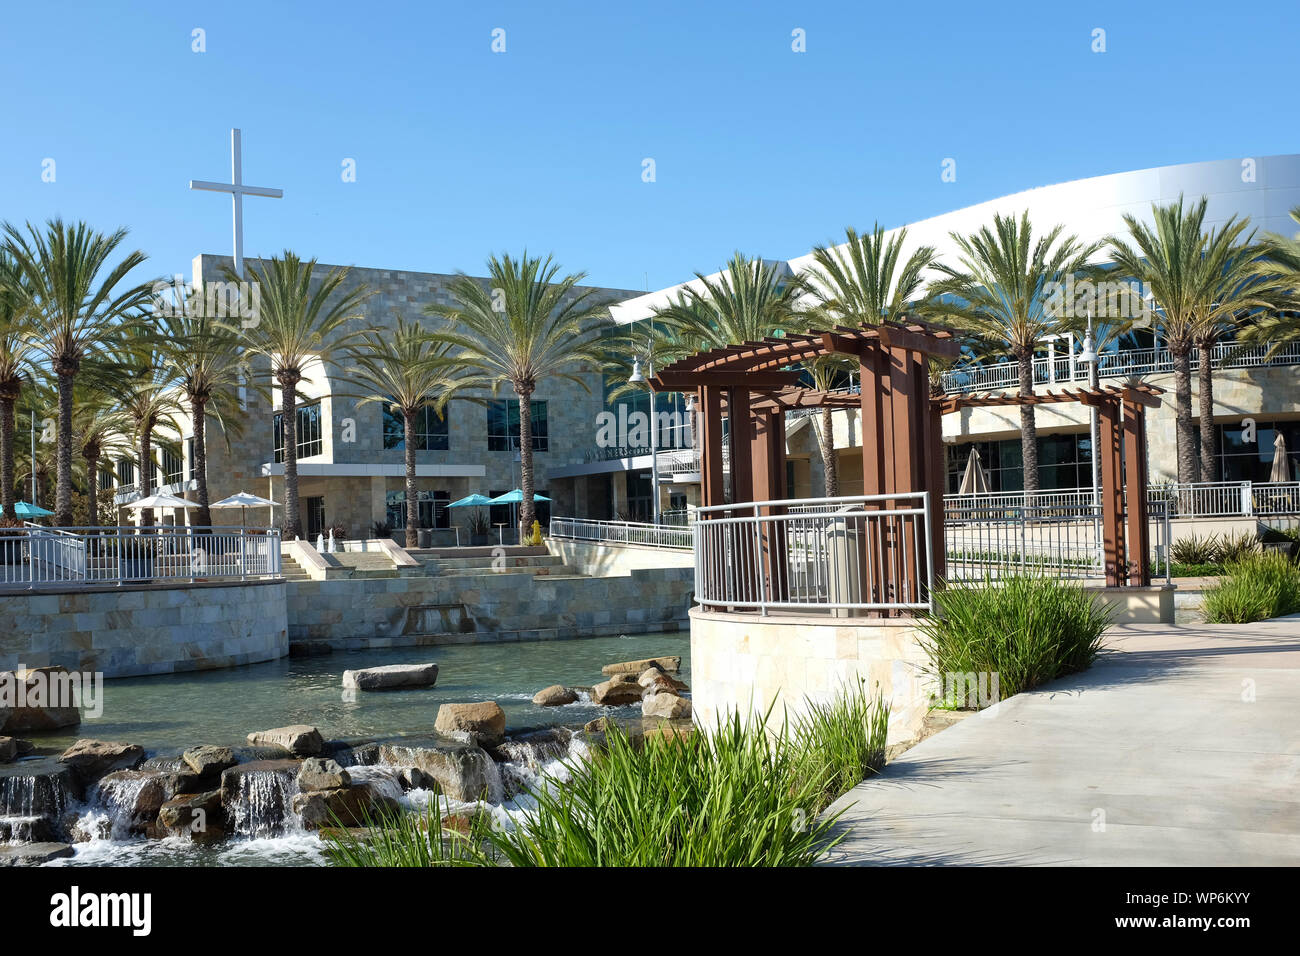 IRVINE, CALIFORNIA - SEPT 7, 2019: Mariners Church Baptistery and Worship Center, a non-denominational, Christian Church located in central Orange Cou Stock Photo